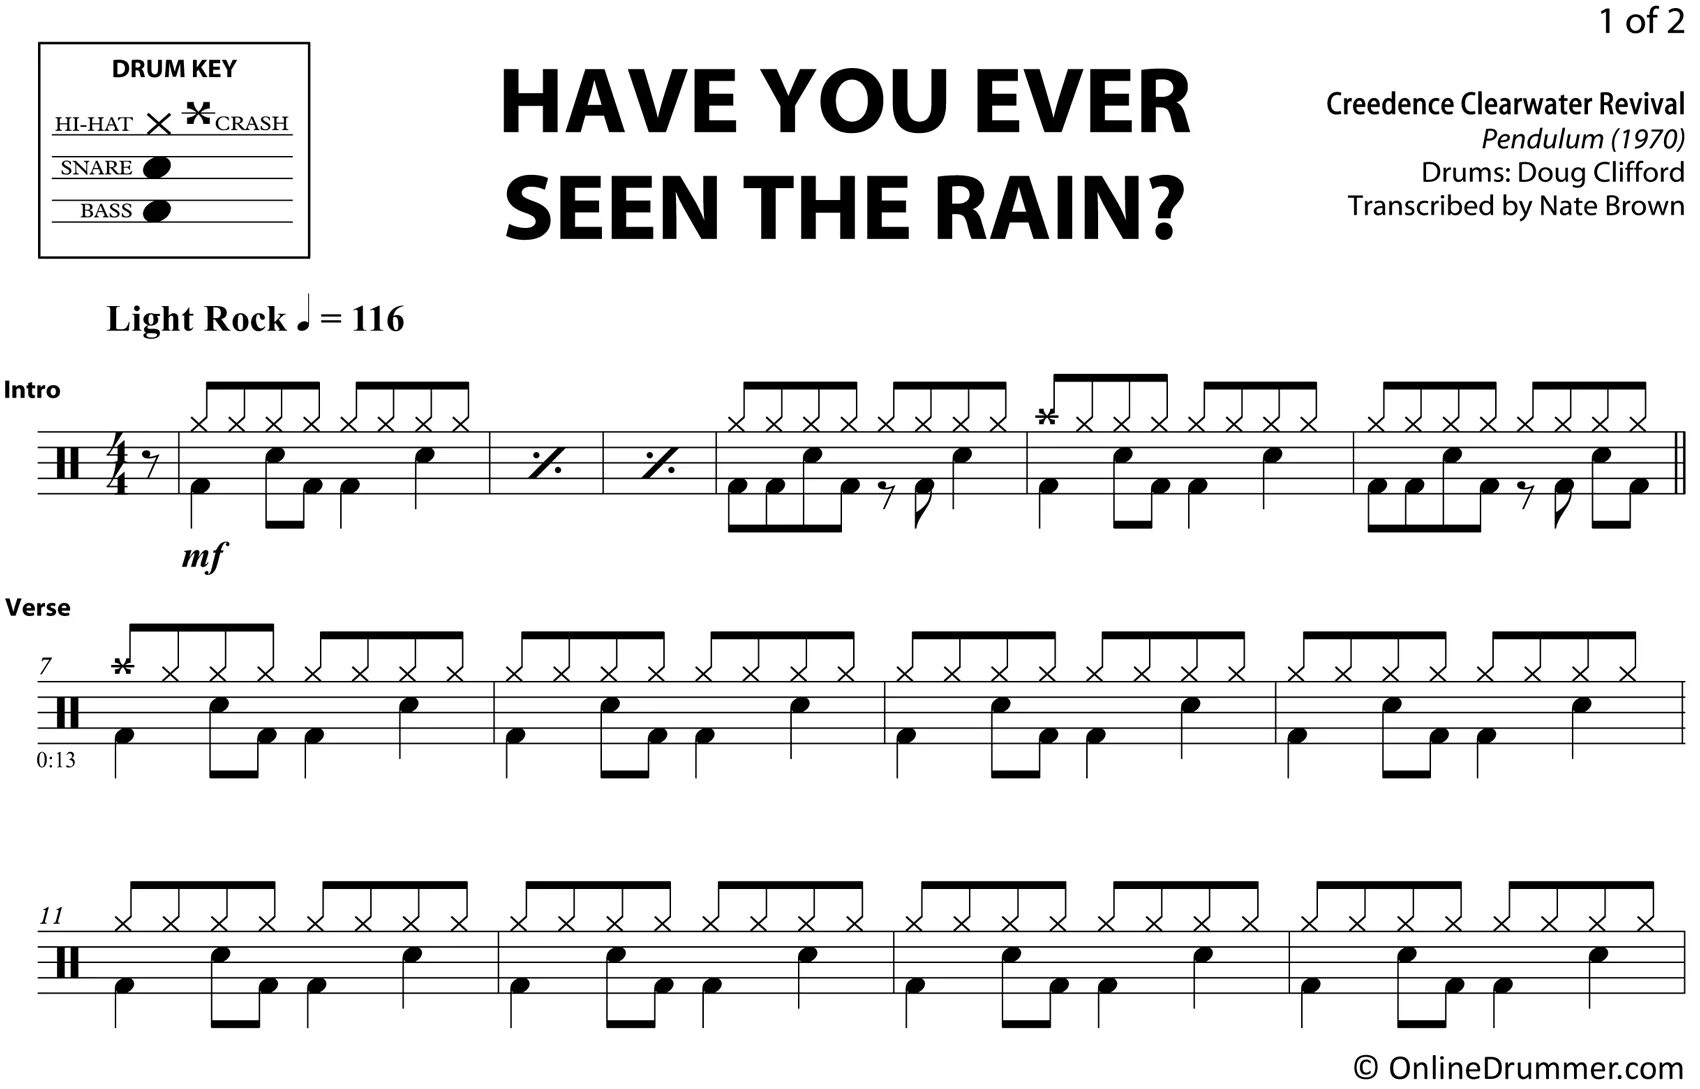 See the rain creedence. Have you ever seen the Rain? От Creedence Clearwater Revival. Creedence Clearwater Revival - have you ever seen the Rain (1970). Have you ever seen the Rain Криденс. Have you ever seen the Rain Ноты.